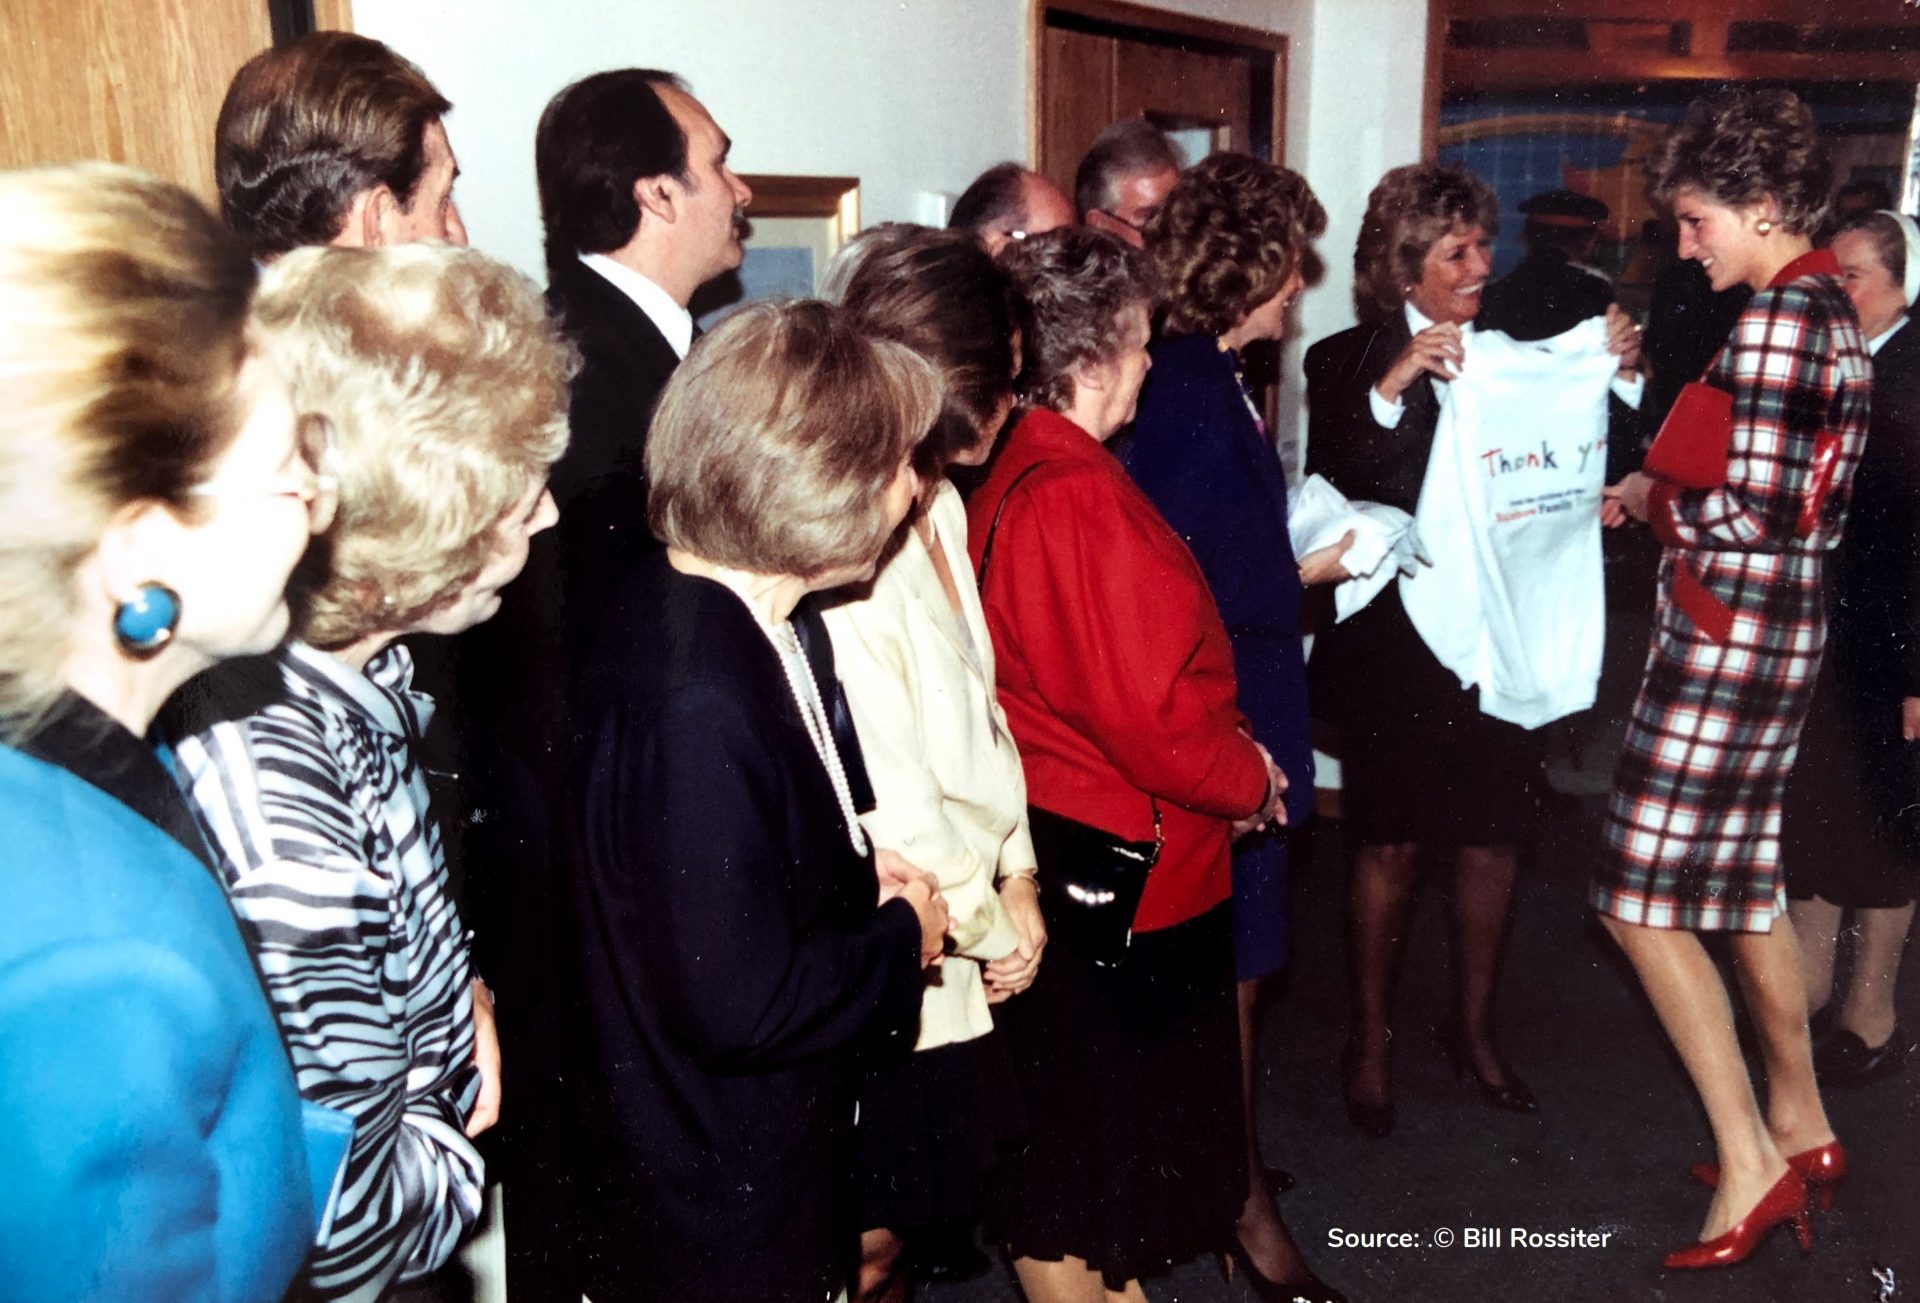 Source Bill Rossiter. Moira Rossiter meets Princess Diana at the opening of Francis House